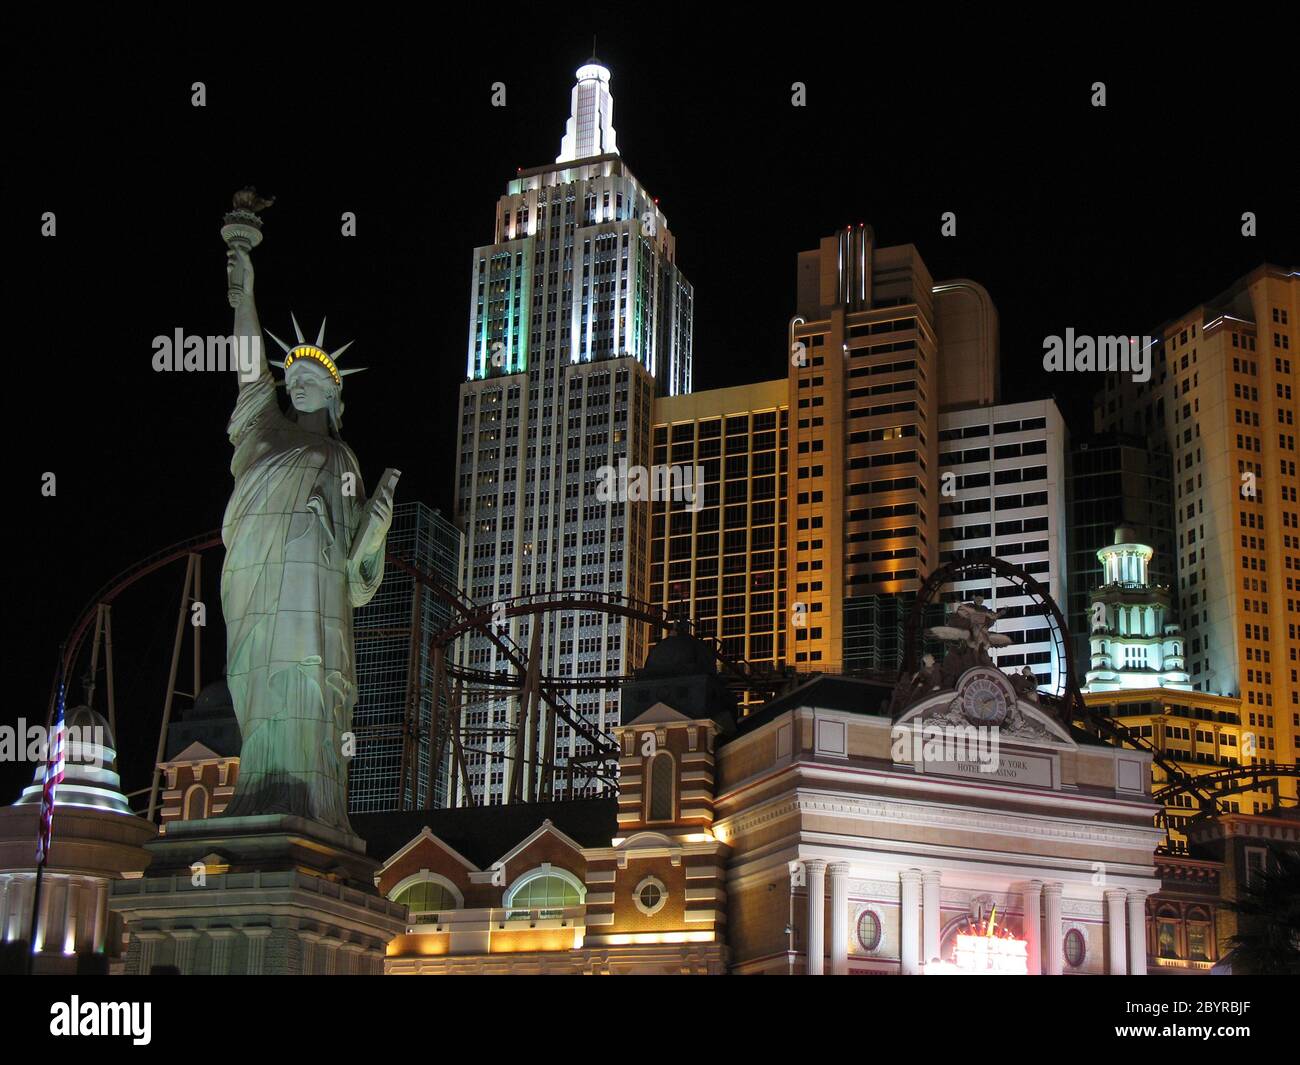 New York Hotel NYNY Hotel   Las Vegas 386 Hotel and most important places in Las Vegas The most beautiful place in Las Vegas Stock Photo